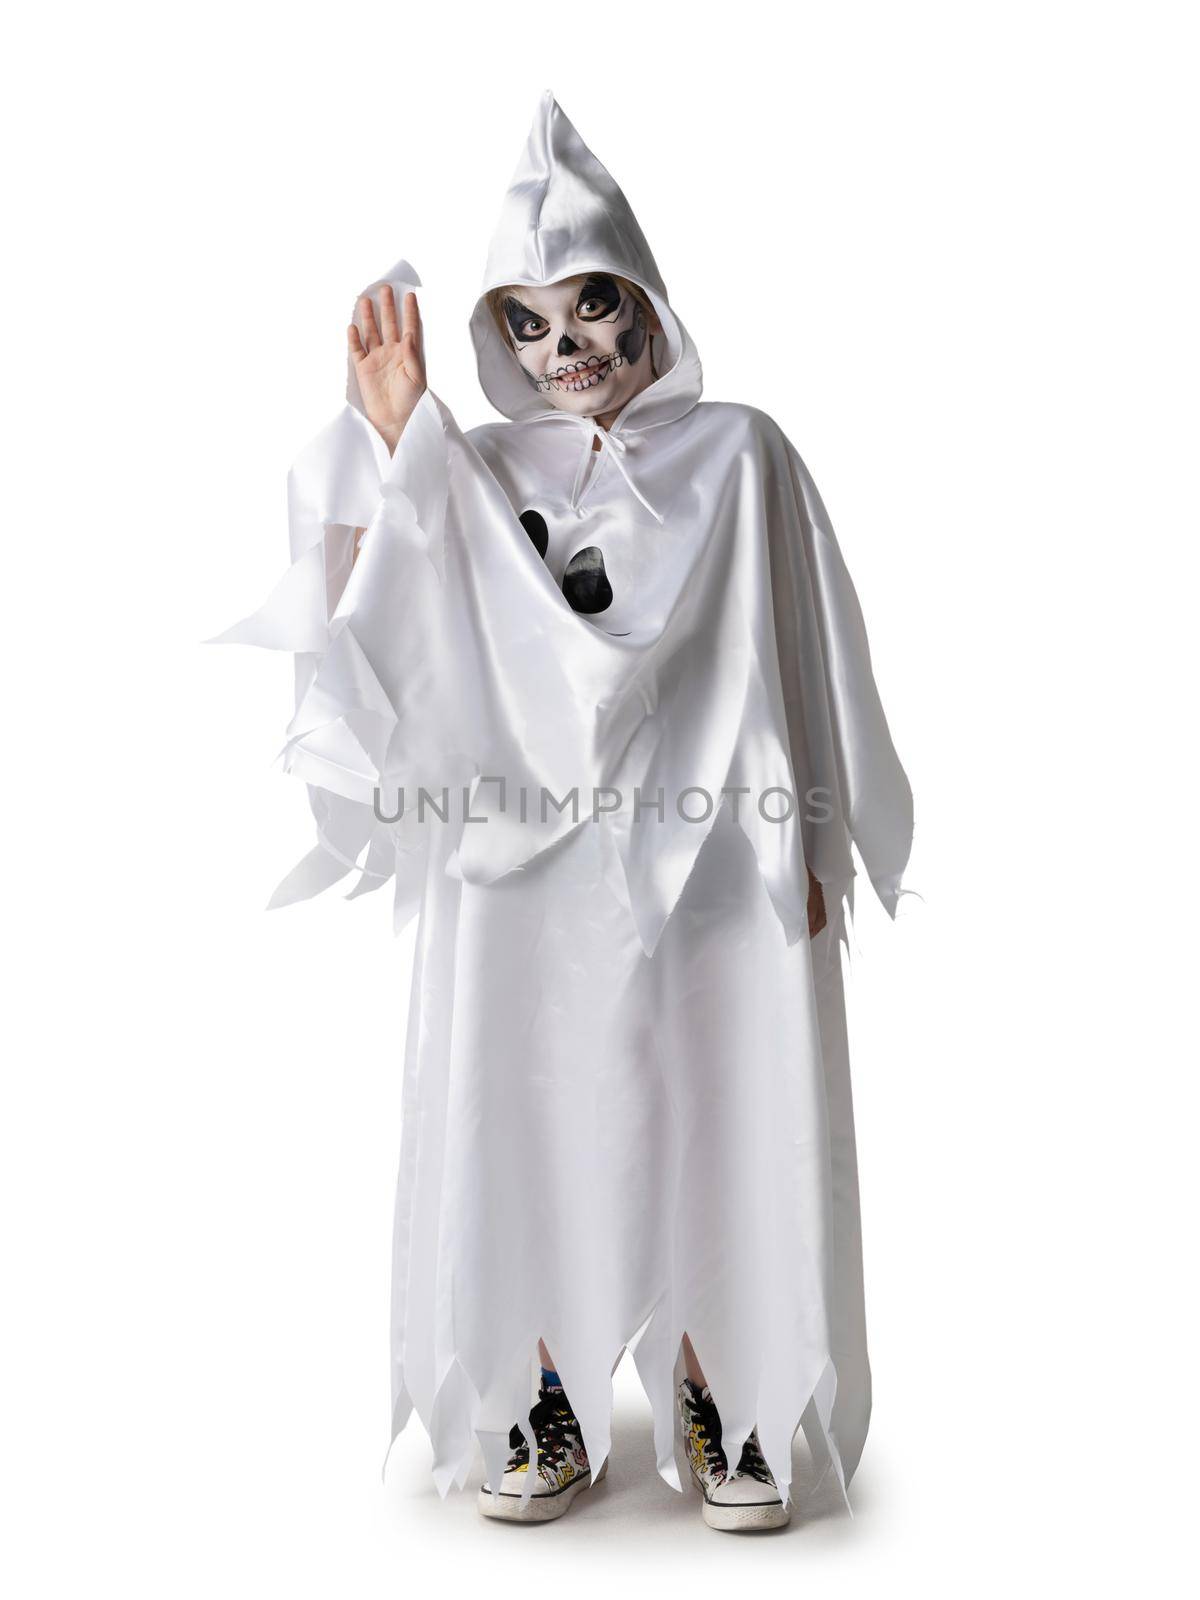 Funny halloween kid in costume with raised arm, waving hello, skeleton, zombie, ghost, wizard isolated on white background